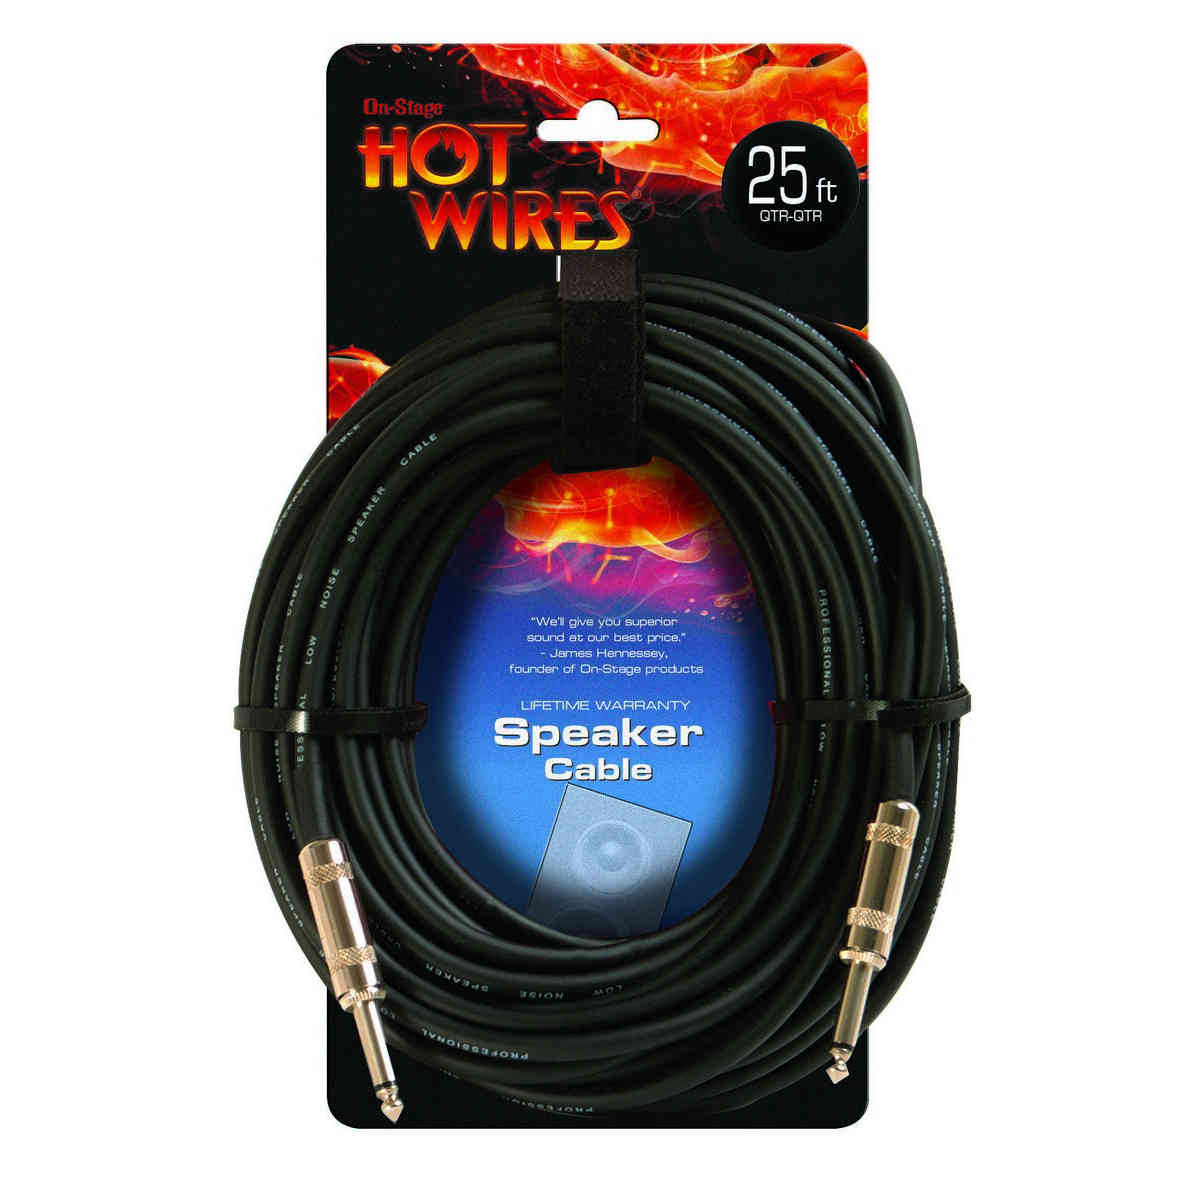 On-Stage SP14-25 Speaker Cable (25', QTR-QTR)